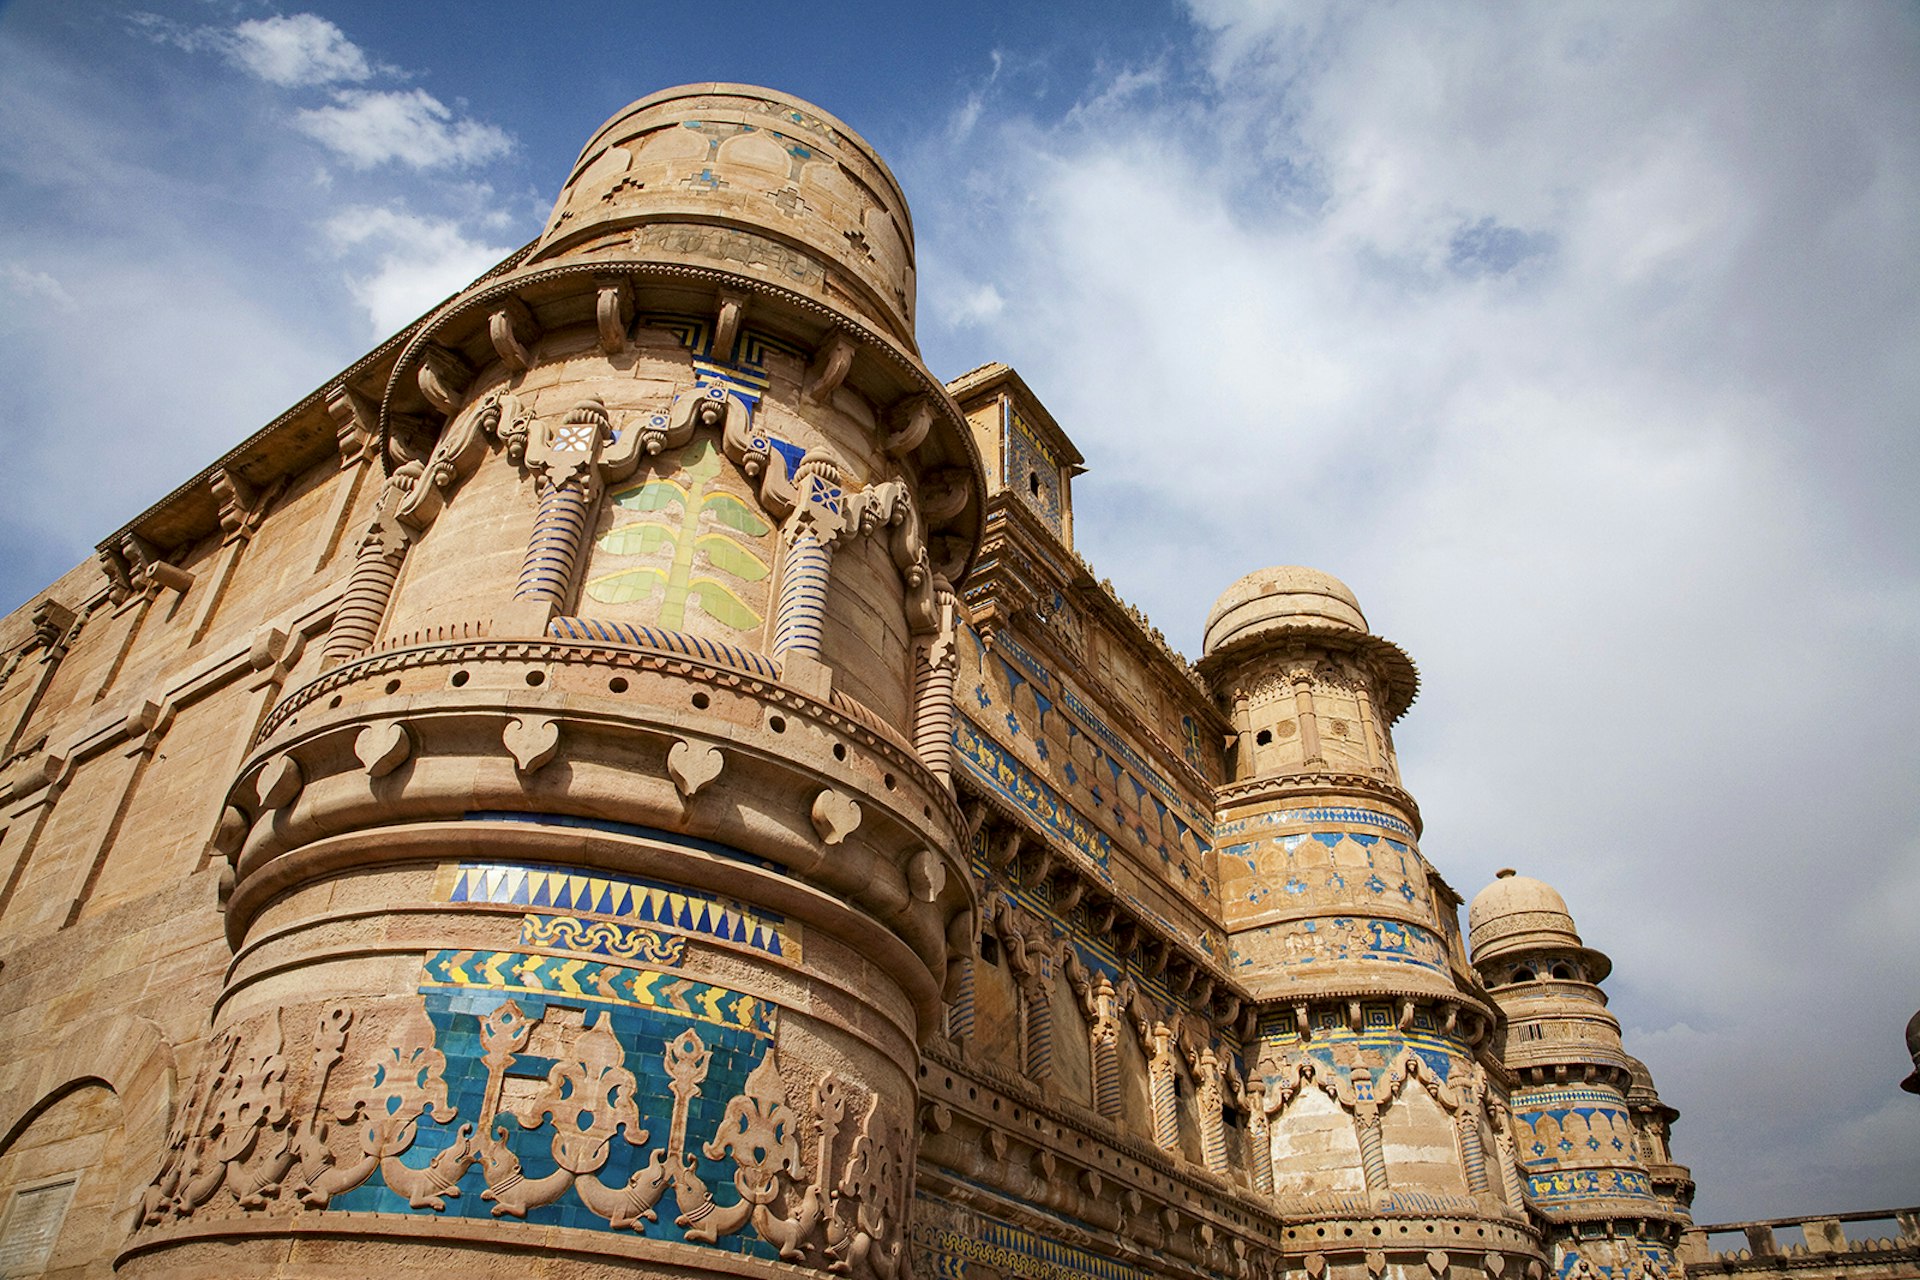 A close image of Gwalior's battlements covered in carvings and blue tile, and topped with rounded turrets. Madhya Pradesh, India.